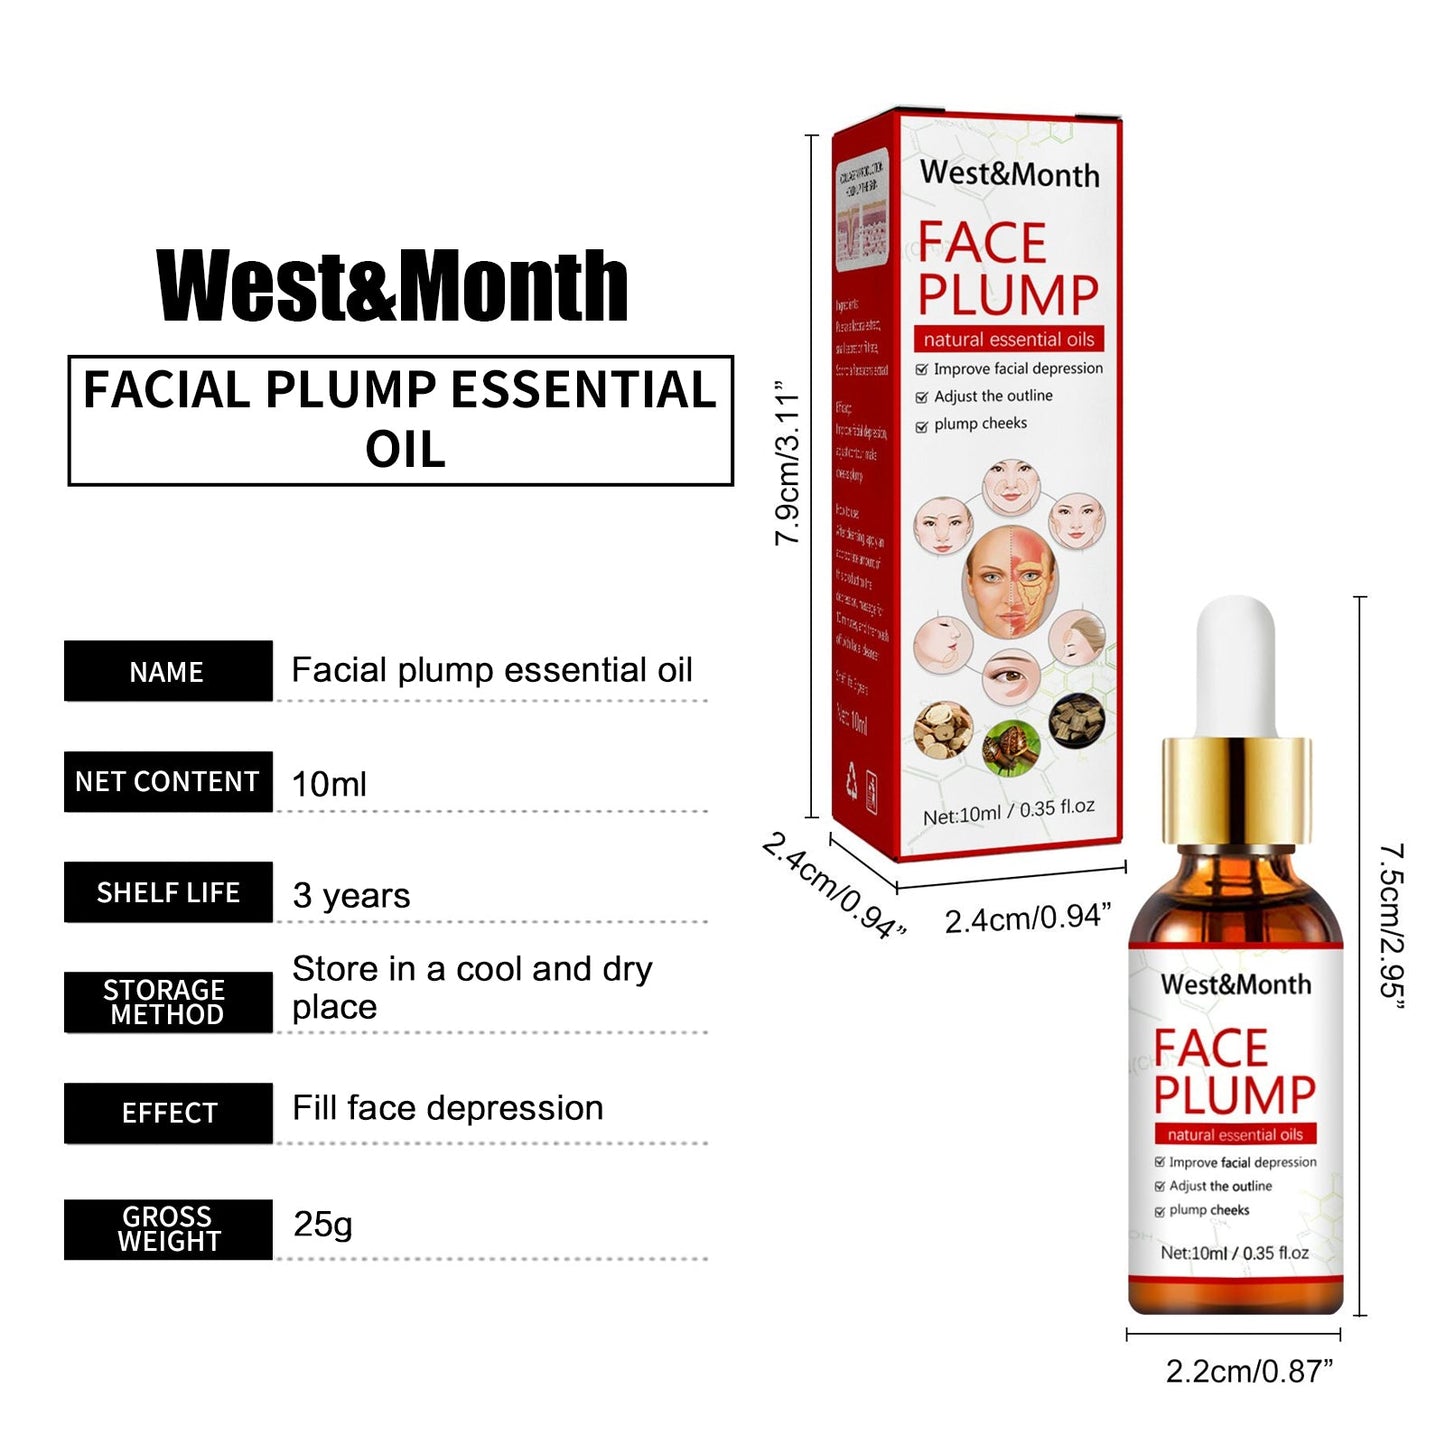 West&Month Anti Aging Serum Natural Facial Essence with Snail Secretion Filtrate Shrinking Pores Moisturizing Firming Skin(10ml)